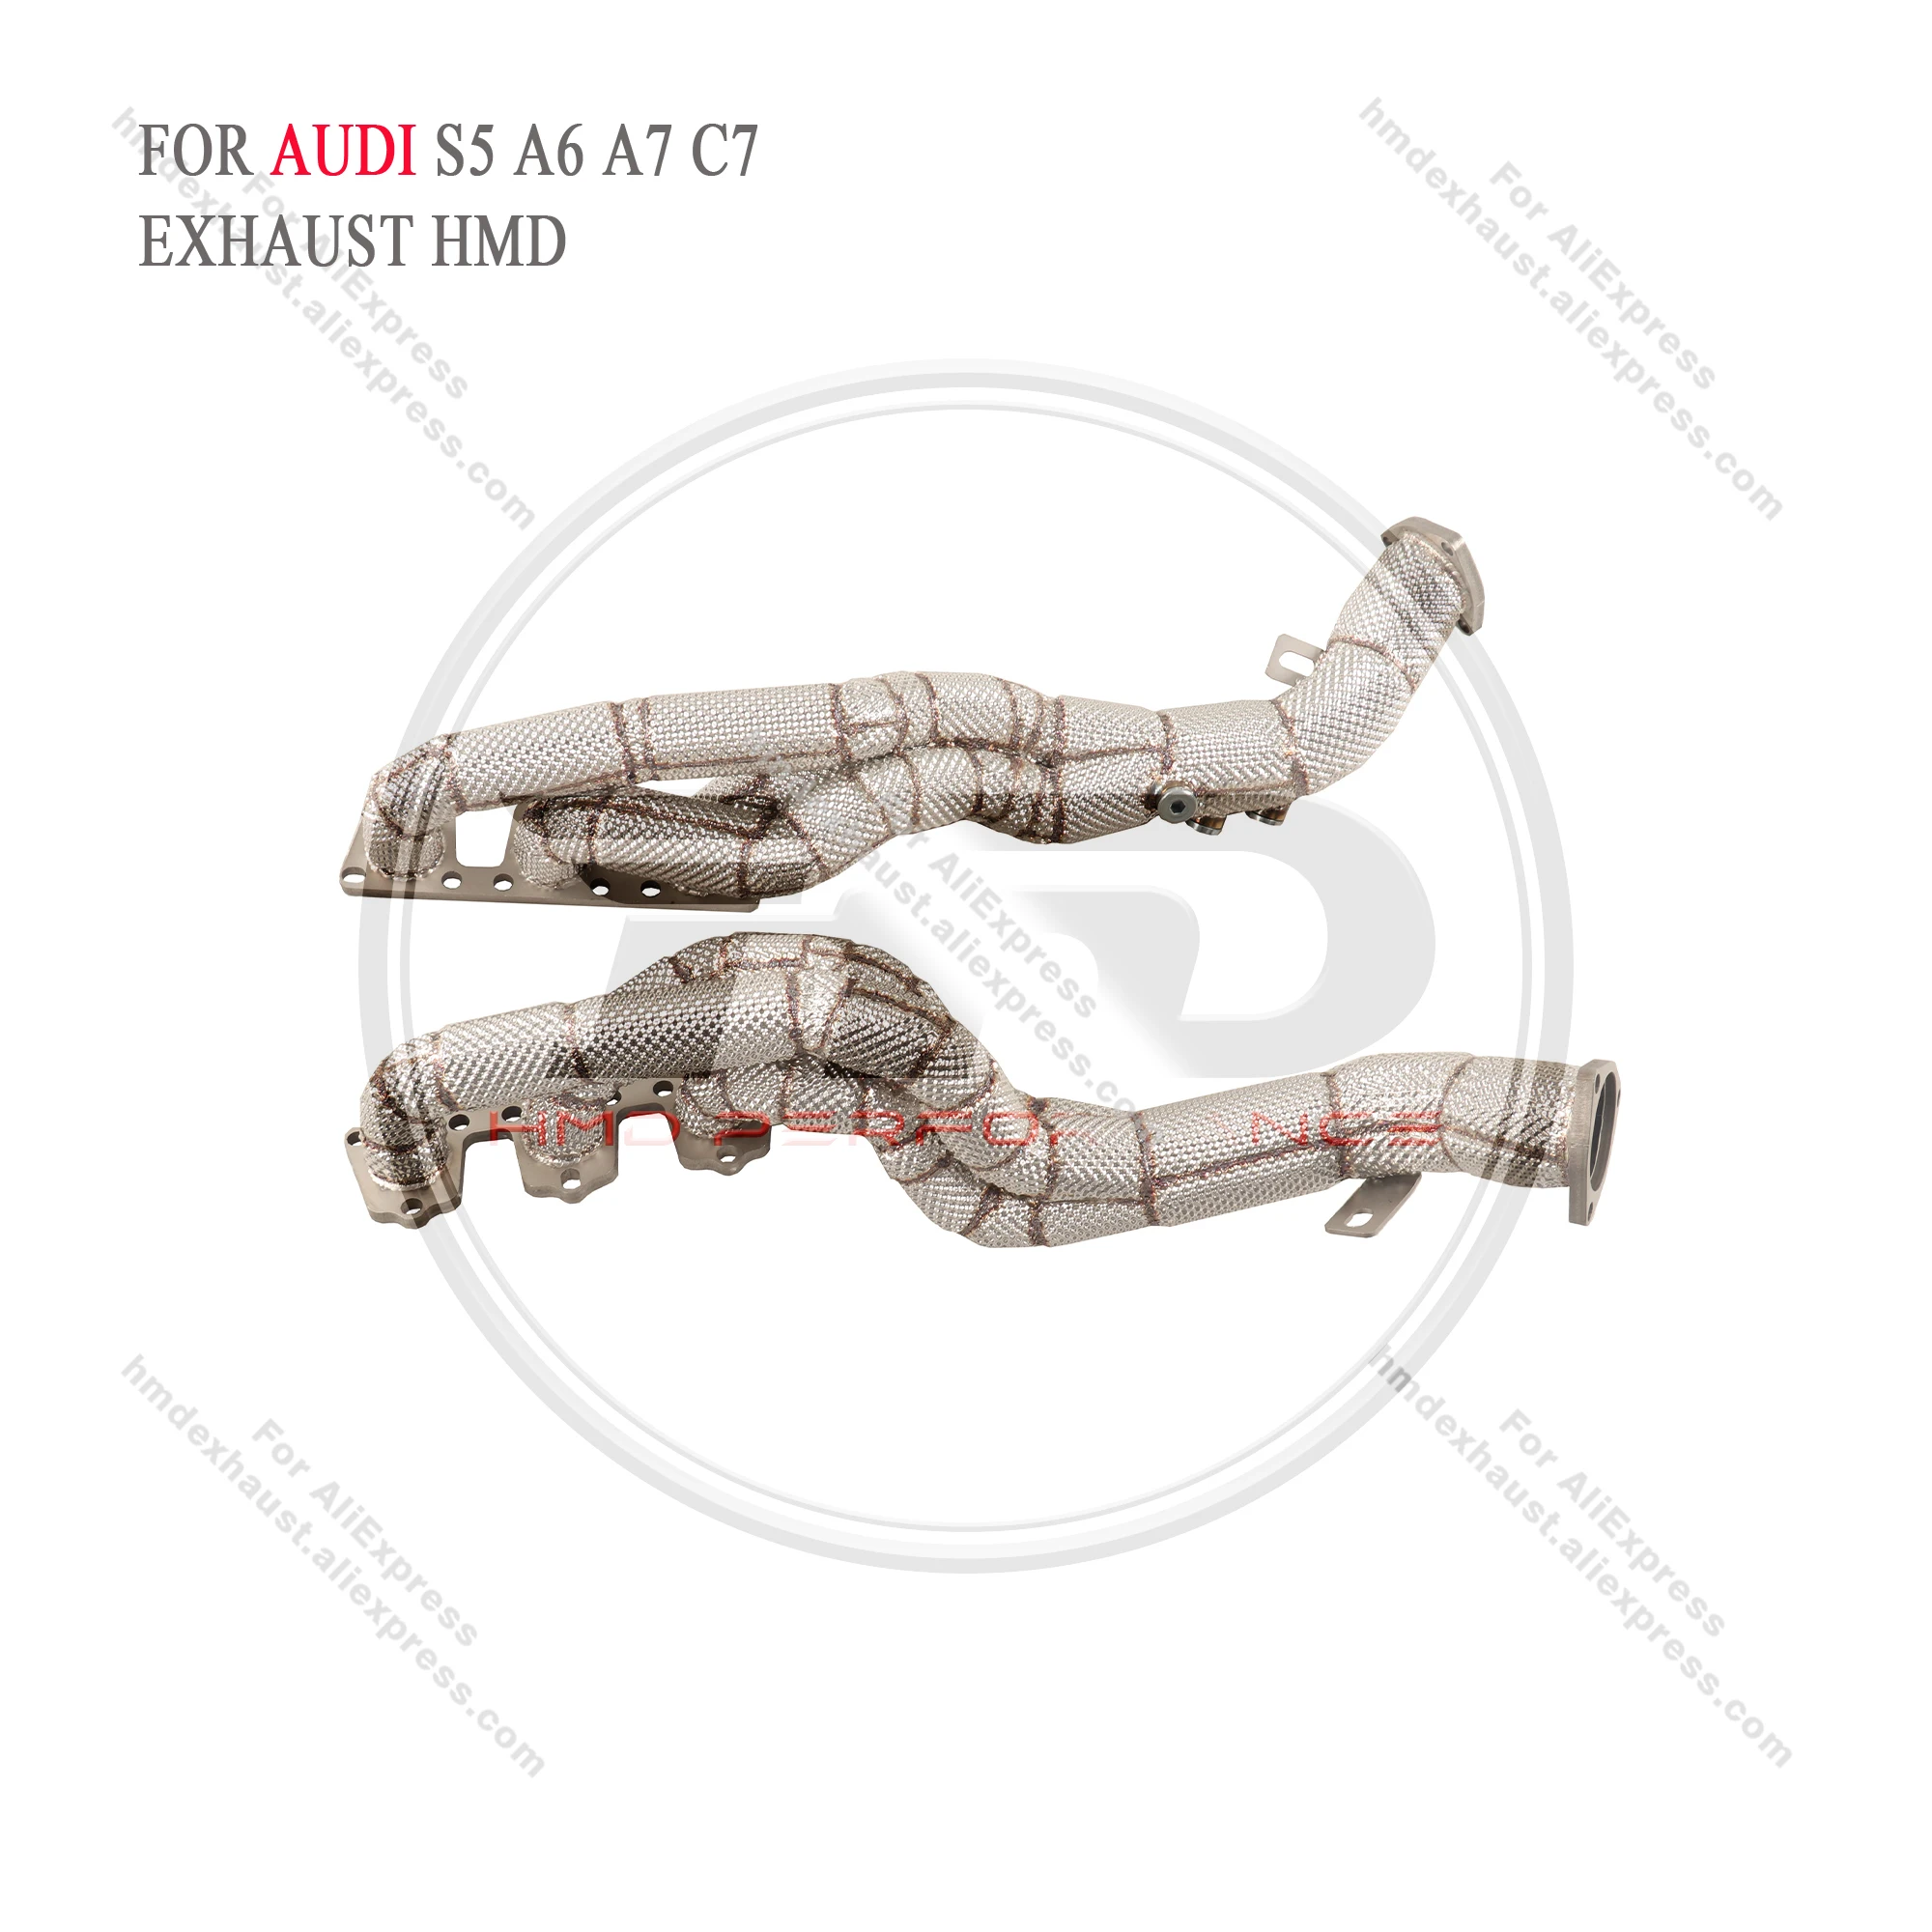 

HMD Exhaust System High Flow Performance Headers Downpipe for Audi A6 A7 C7 S4 S5 B8 3.0T Manifold With Heat Shield